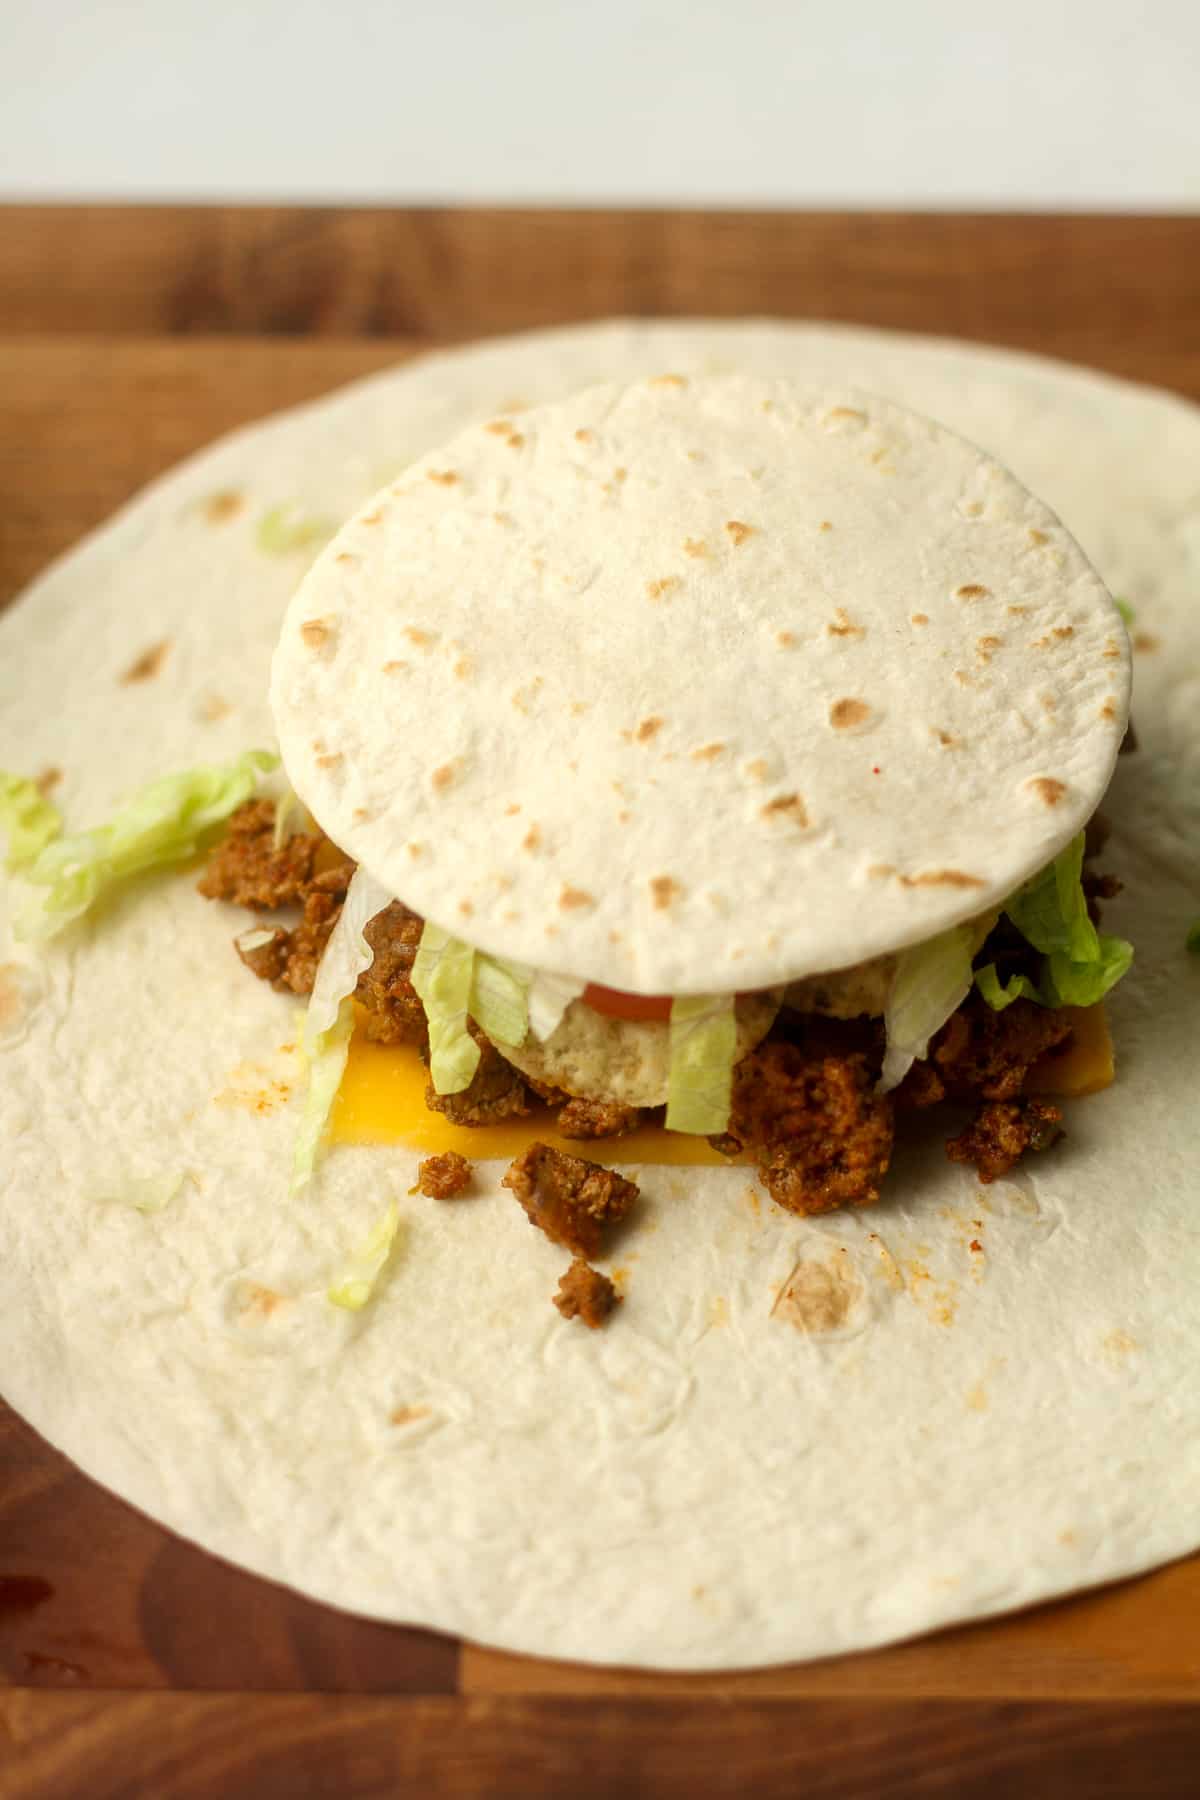 Side view of a large tortilla topped with fillings and a small tortilla on top.